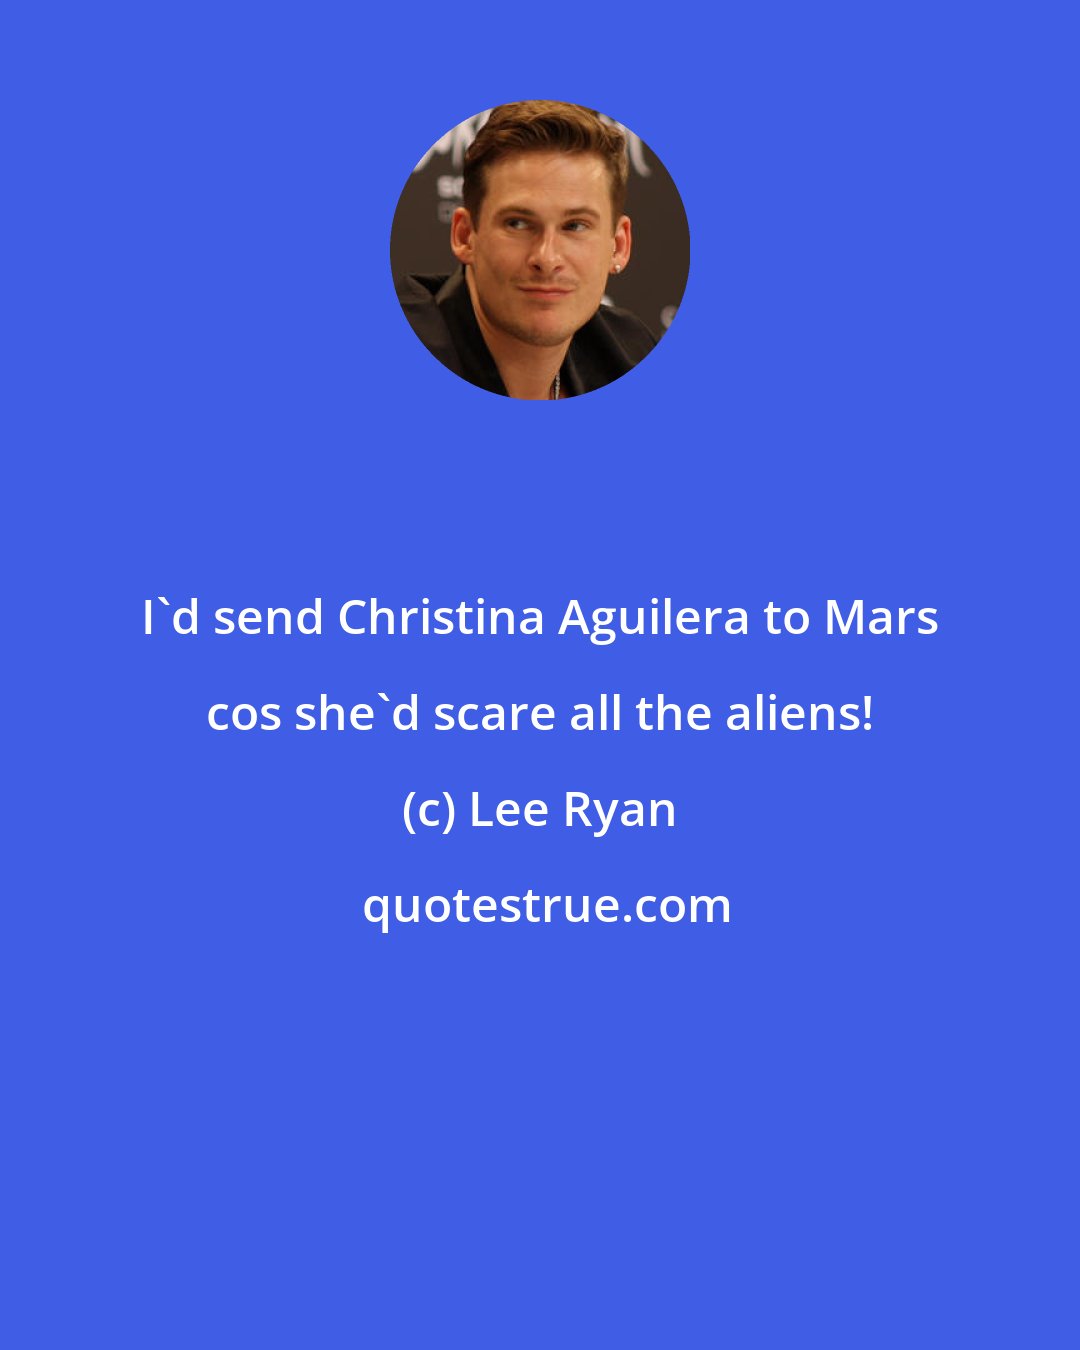 Lee Ryan: I'd send Christina Aguilera to Mars cos she'd scare all the aliens!